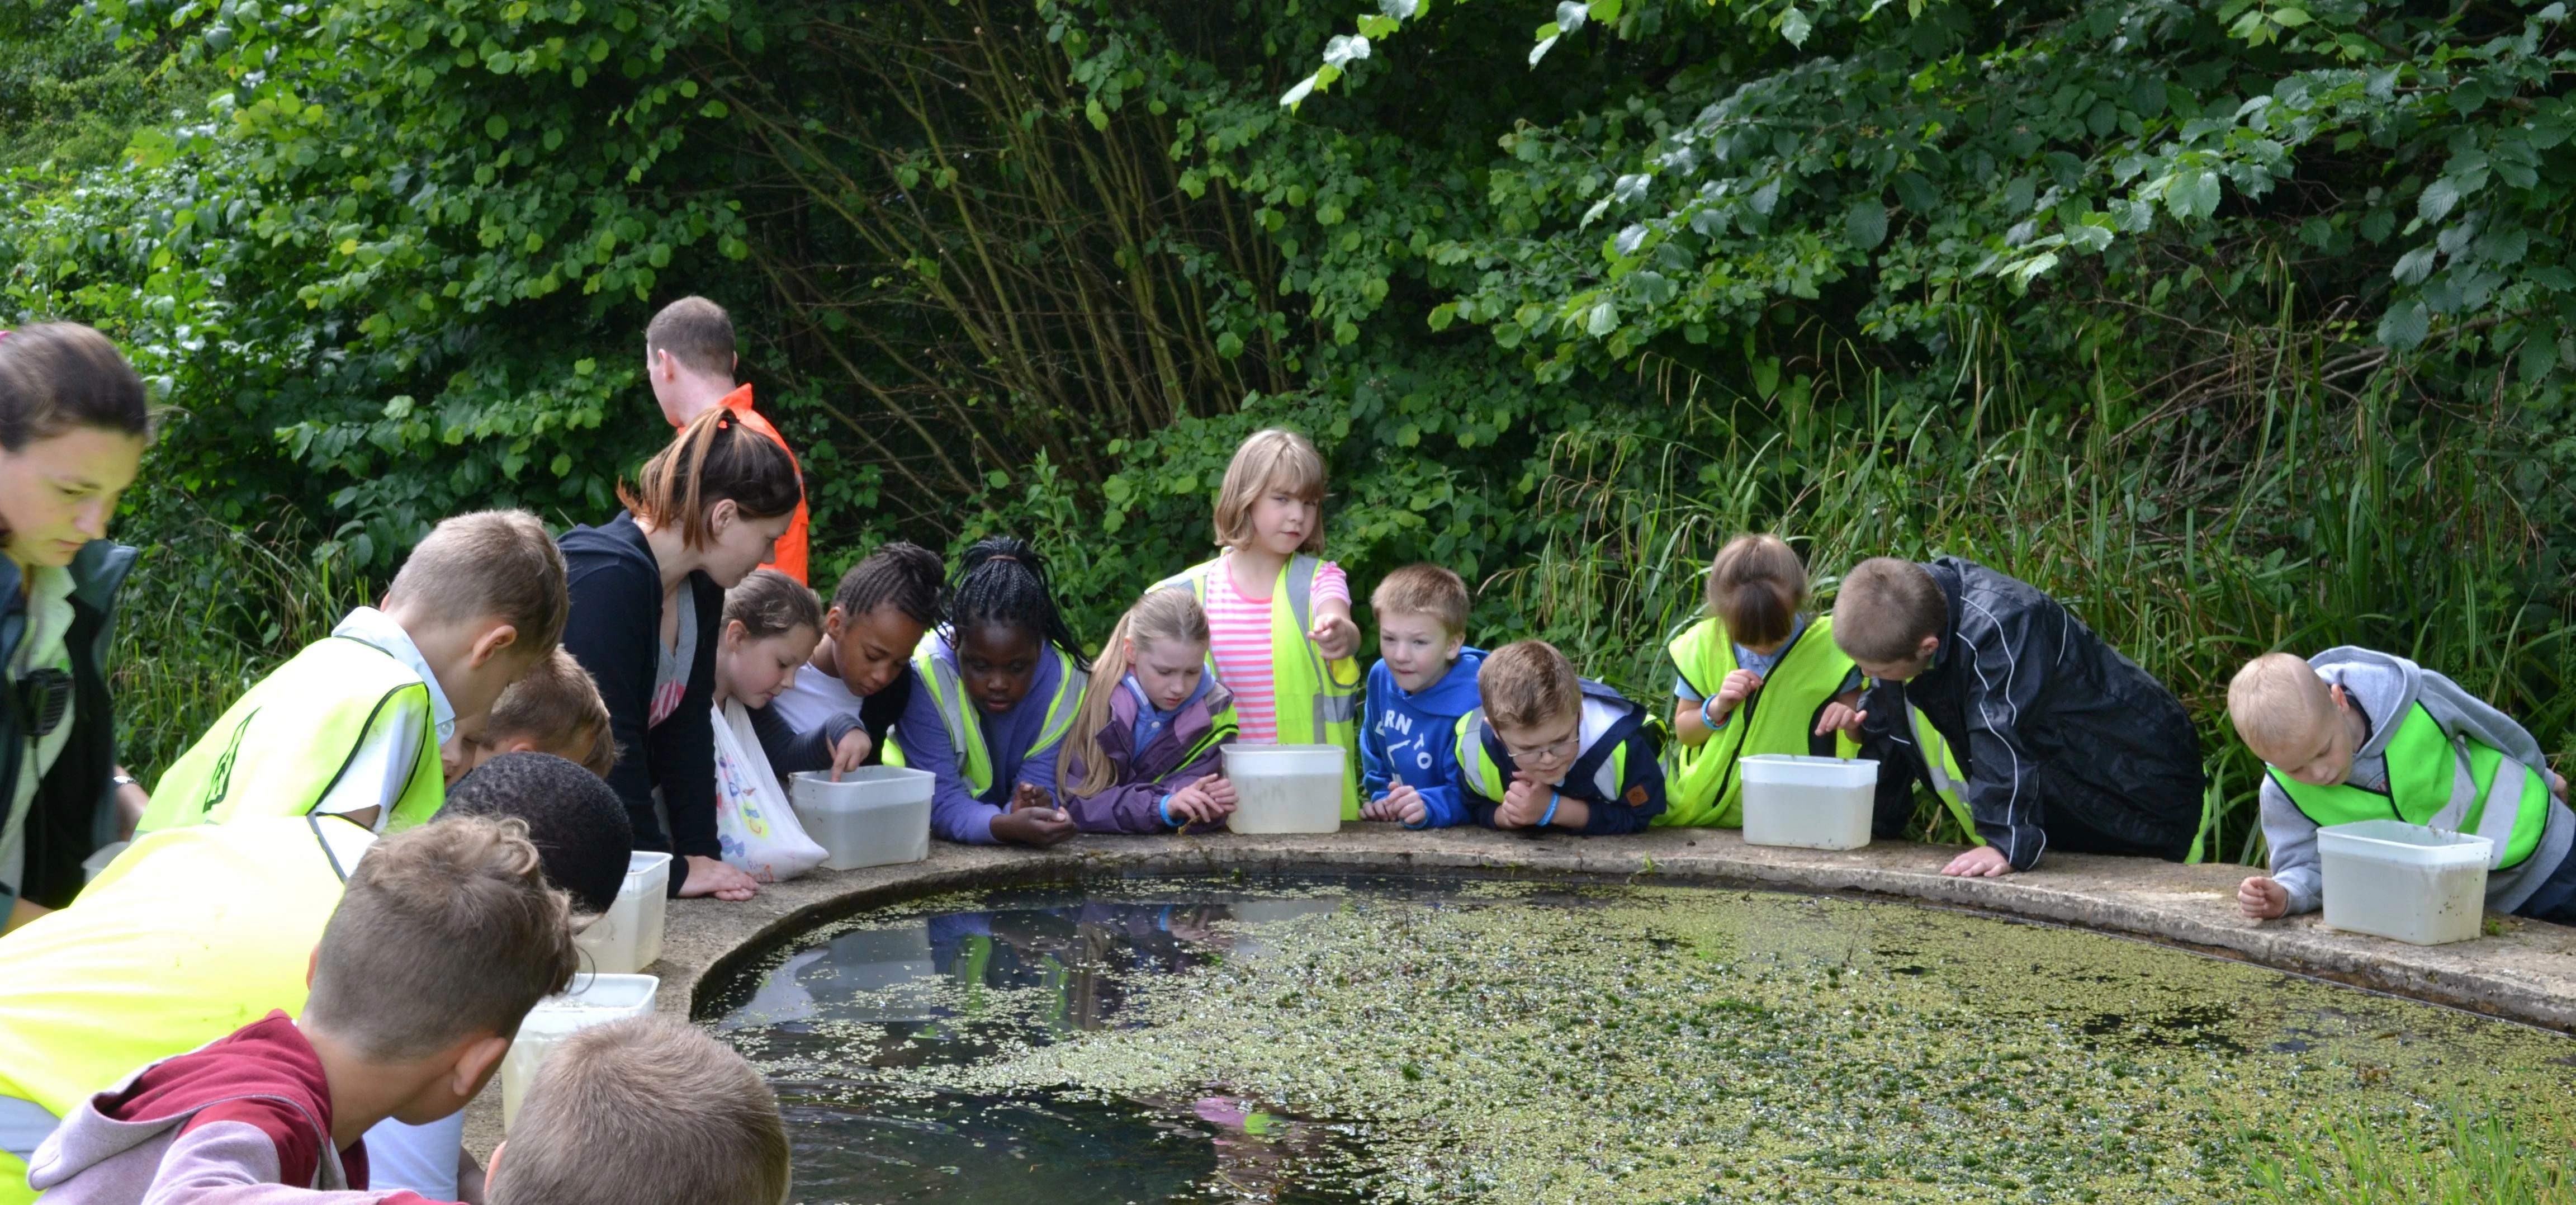 Children from Park Spring Primary School in Leeds enjoy a day out at Nell Bank in Ilkley.